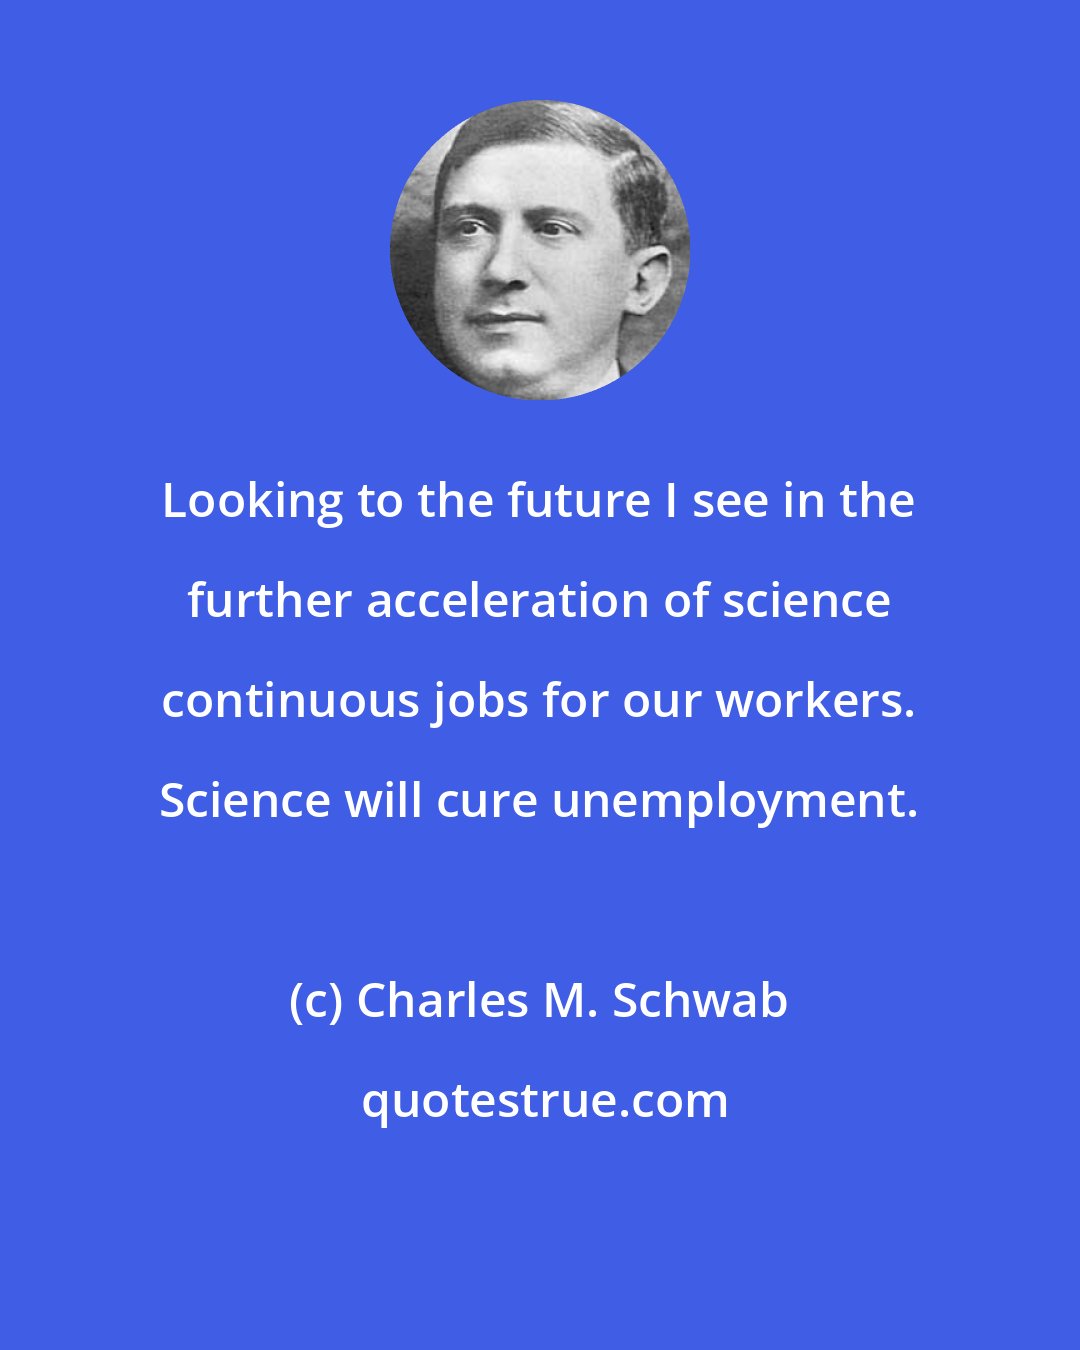 Charles M. Schwab: Looking to the future I see in the further acceleration of science continuous jobs for our workers. Science will cure unemployment.